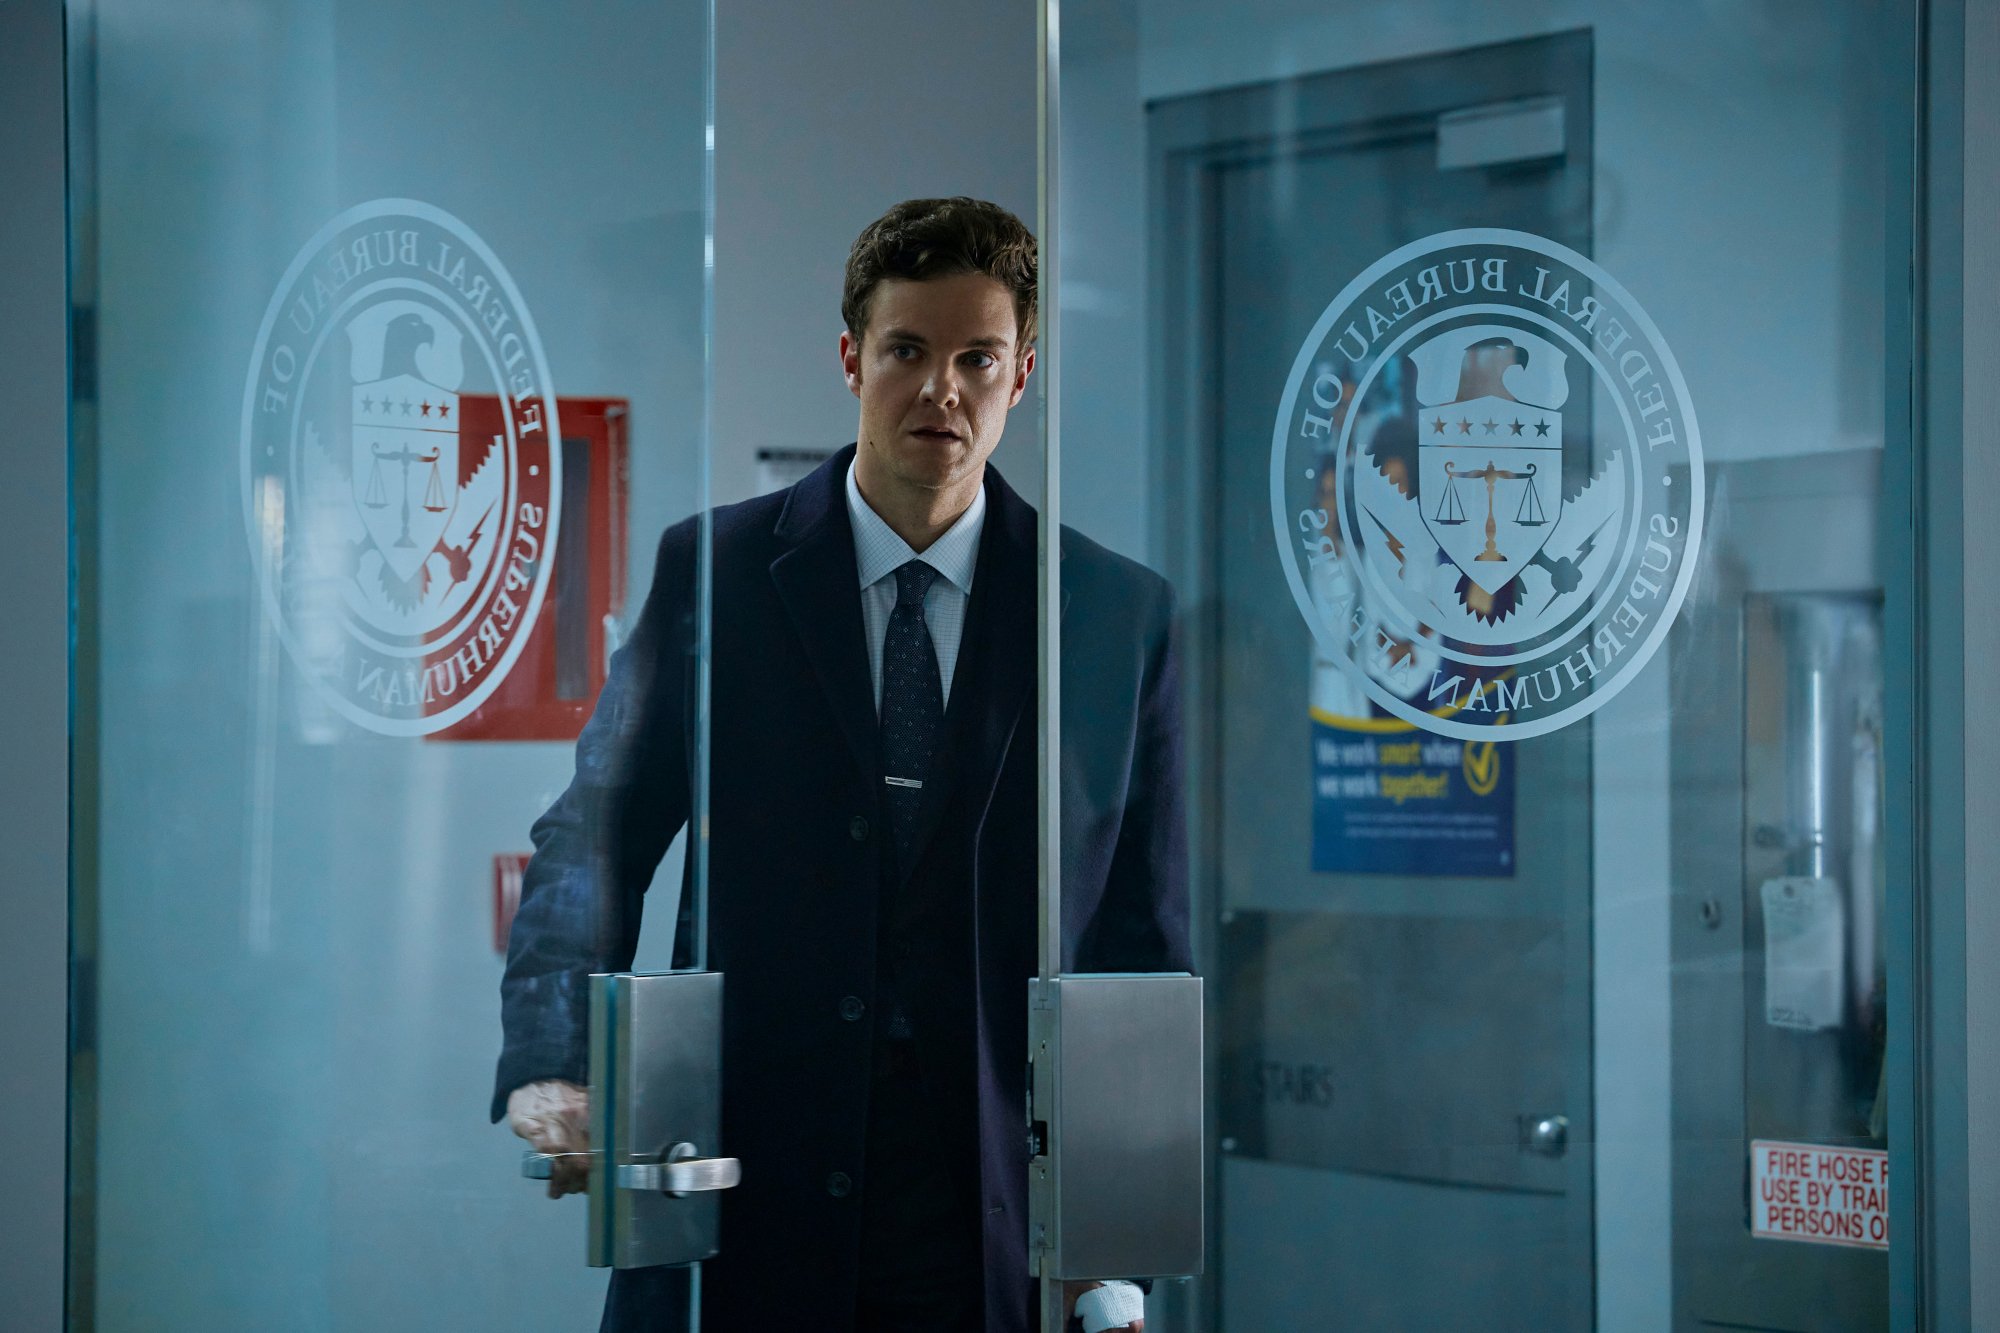 Jack Quaid as Hughie Campbell in 'The Boys' Season 3. He's wearing a suit and walking through a set of glass doors.